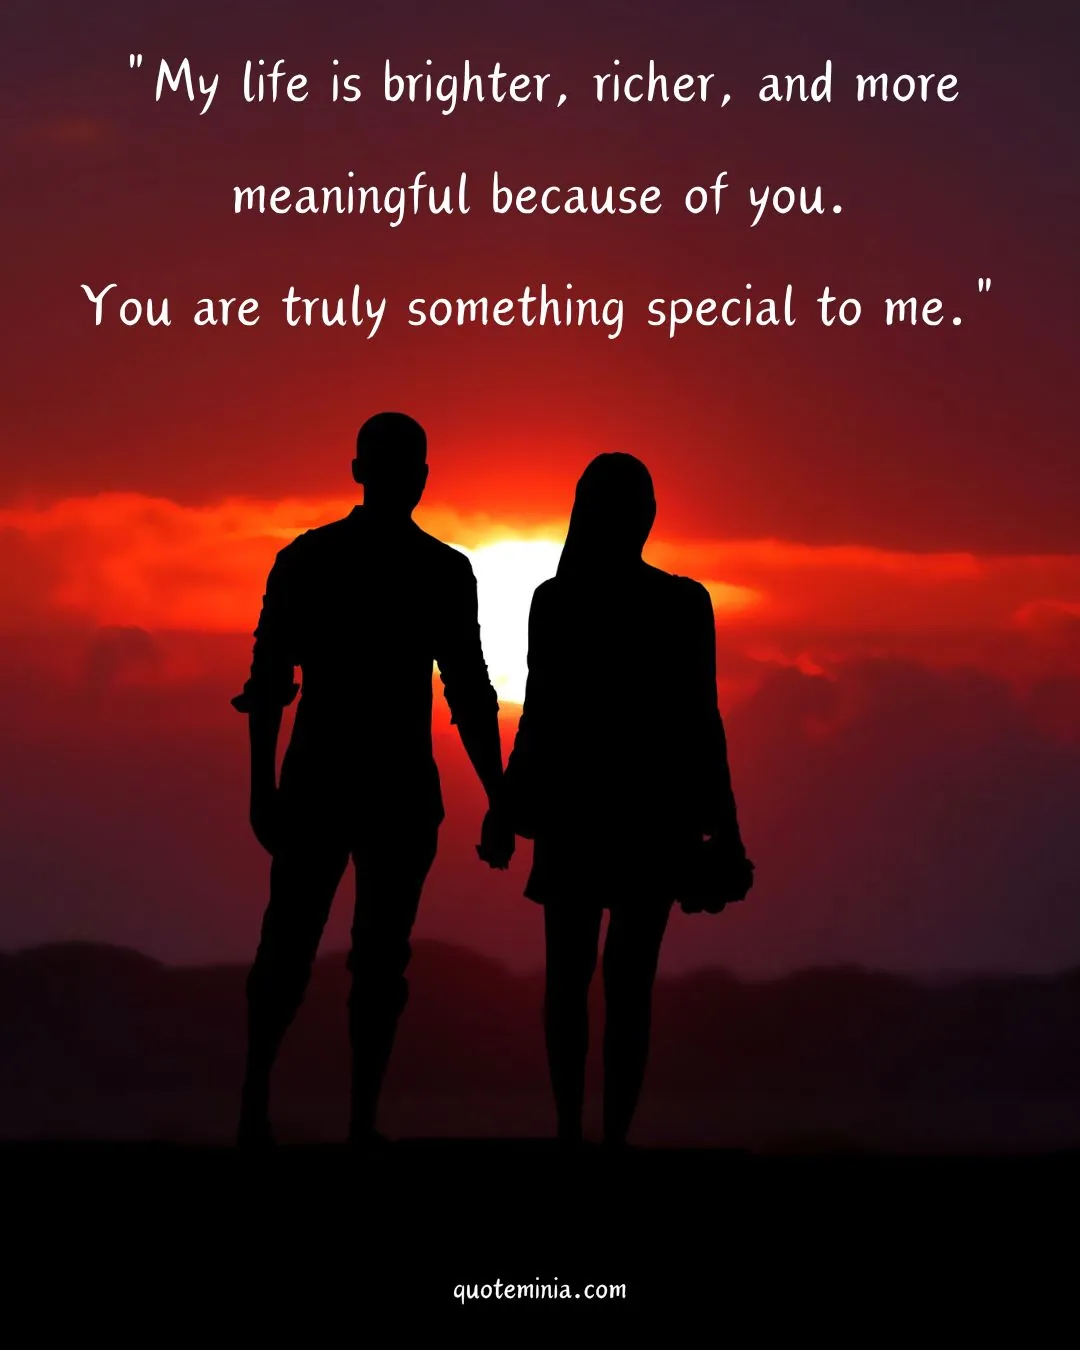 You Are Something Special to Me Quotes Image 1 (1)